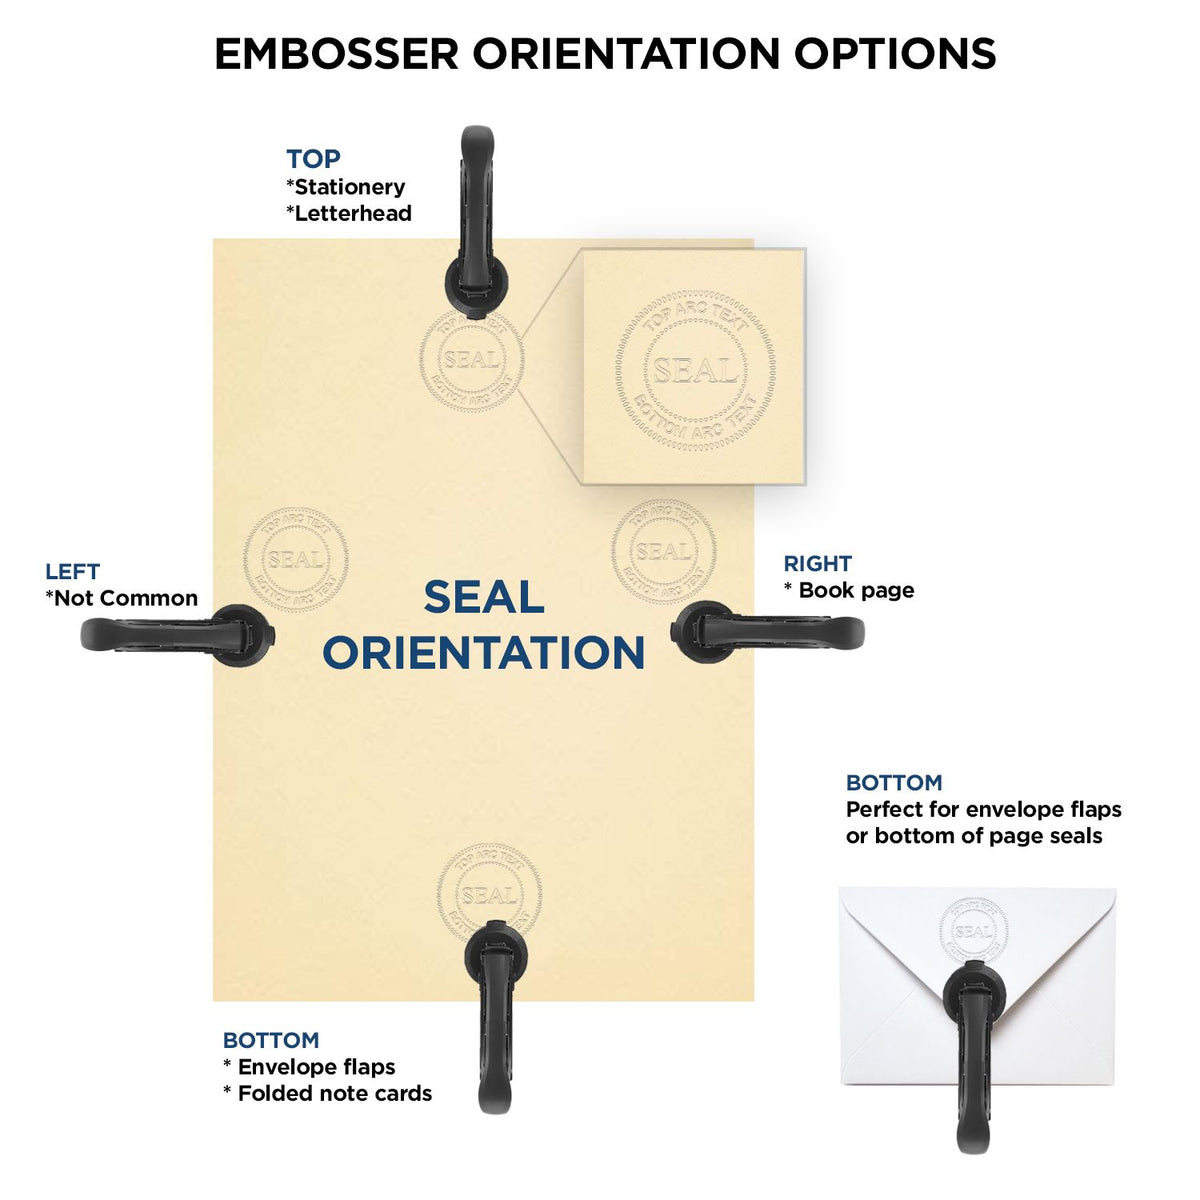 An infographic for the Gift Hawaii Engineer Seal showing embosser orientation, this is showing examples of a top, bottom, right and left insert.